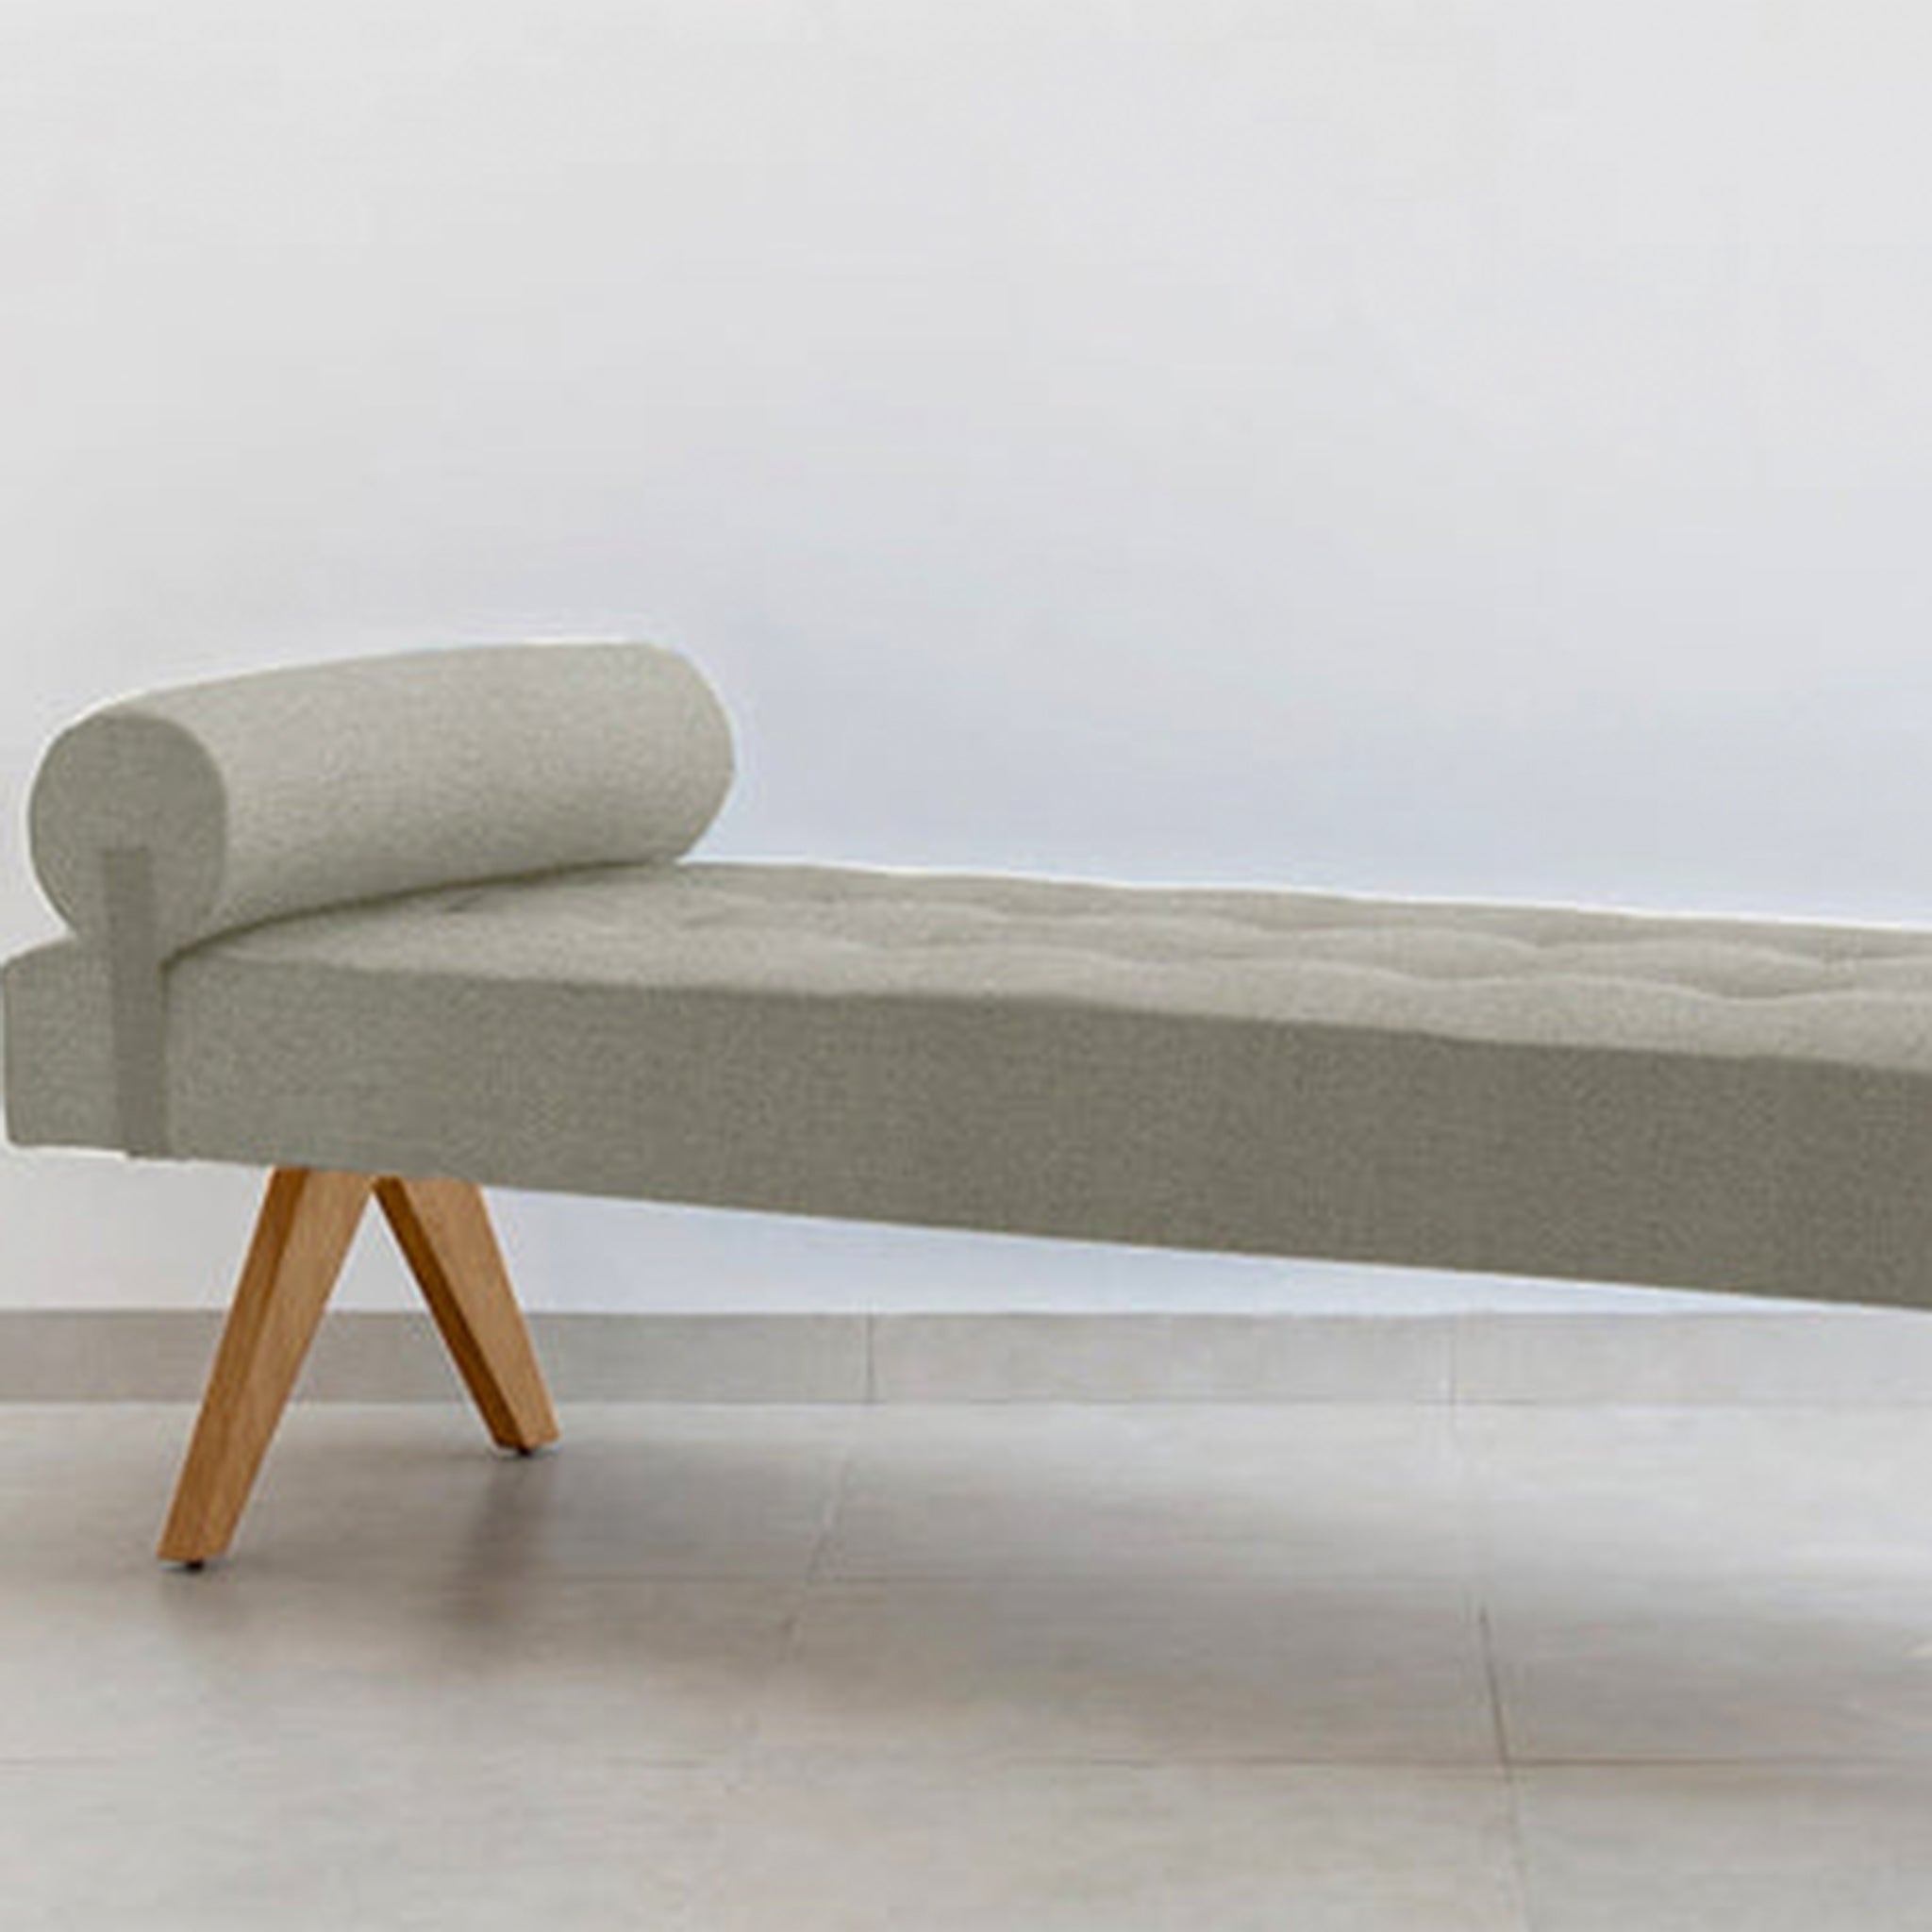 The Jack Daybed suitable for various settings